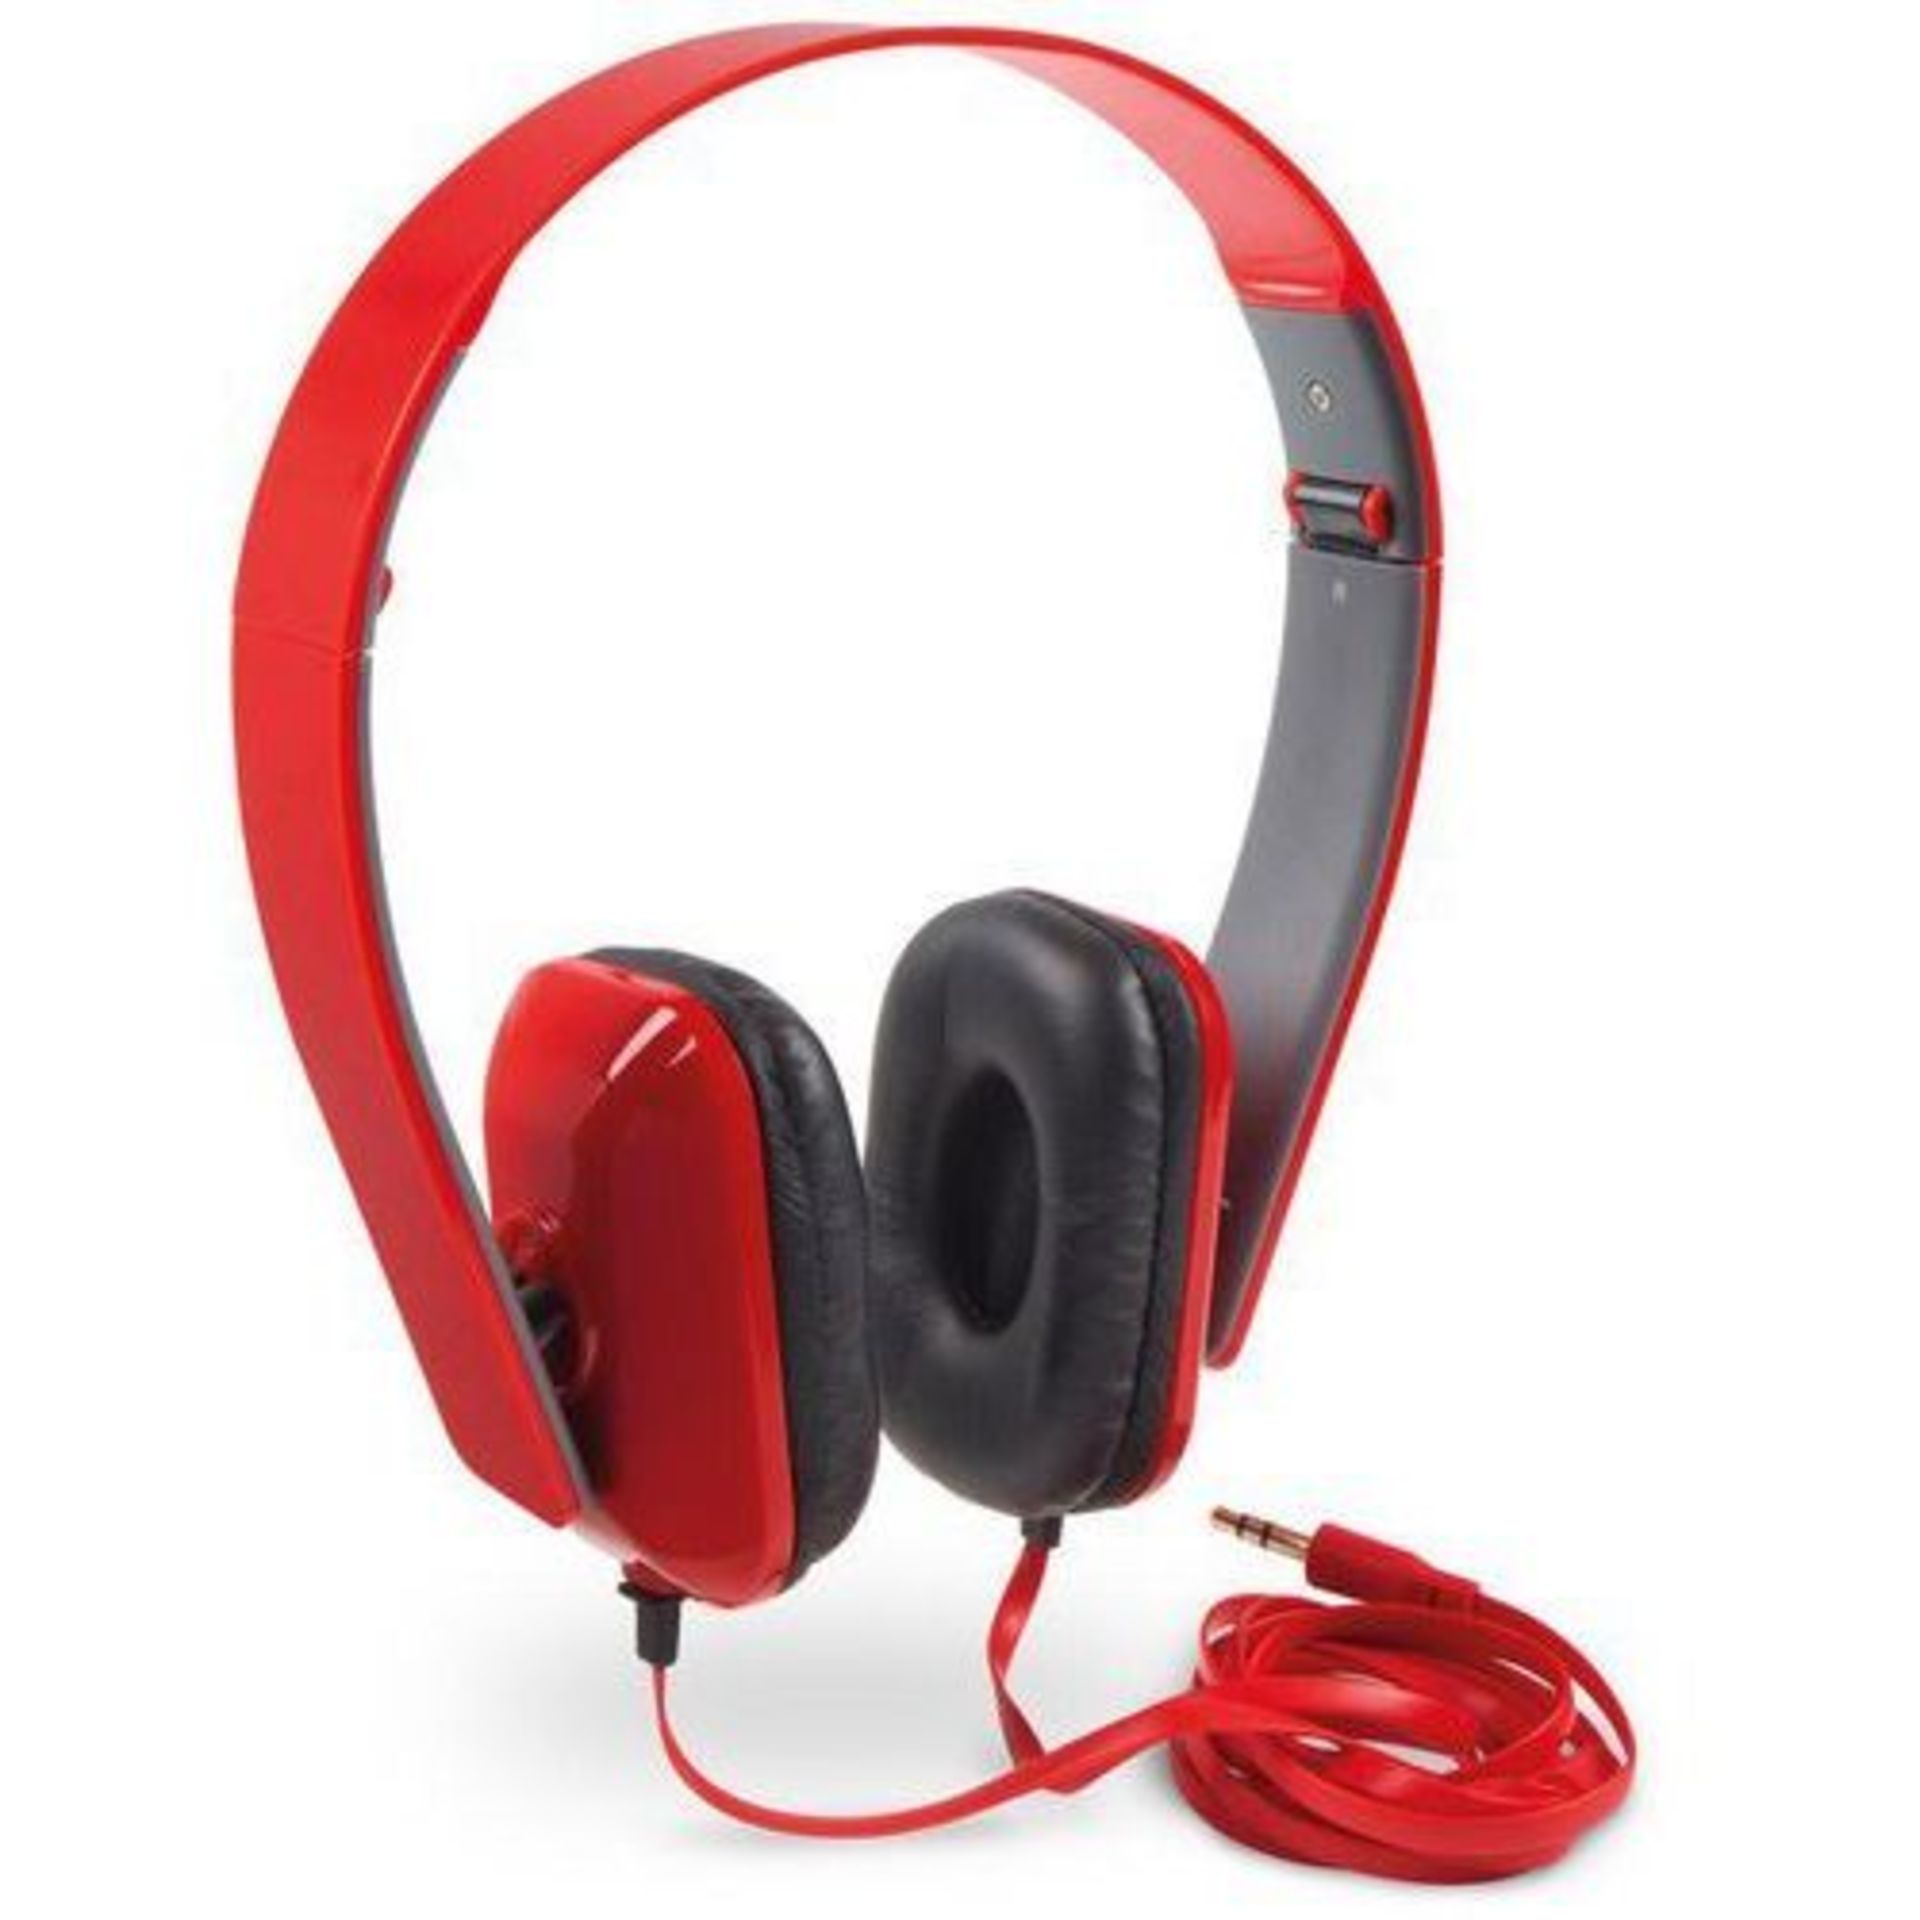 V *TRADE QTY* Brand New Targus Carry & Listen Headphones X 8 YOUR BID PRICE TO BE MULTIPLIED BY